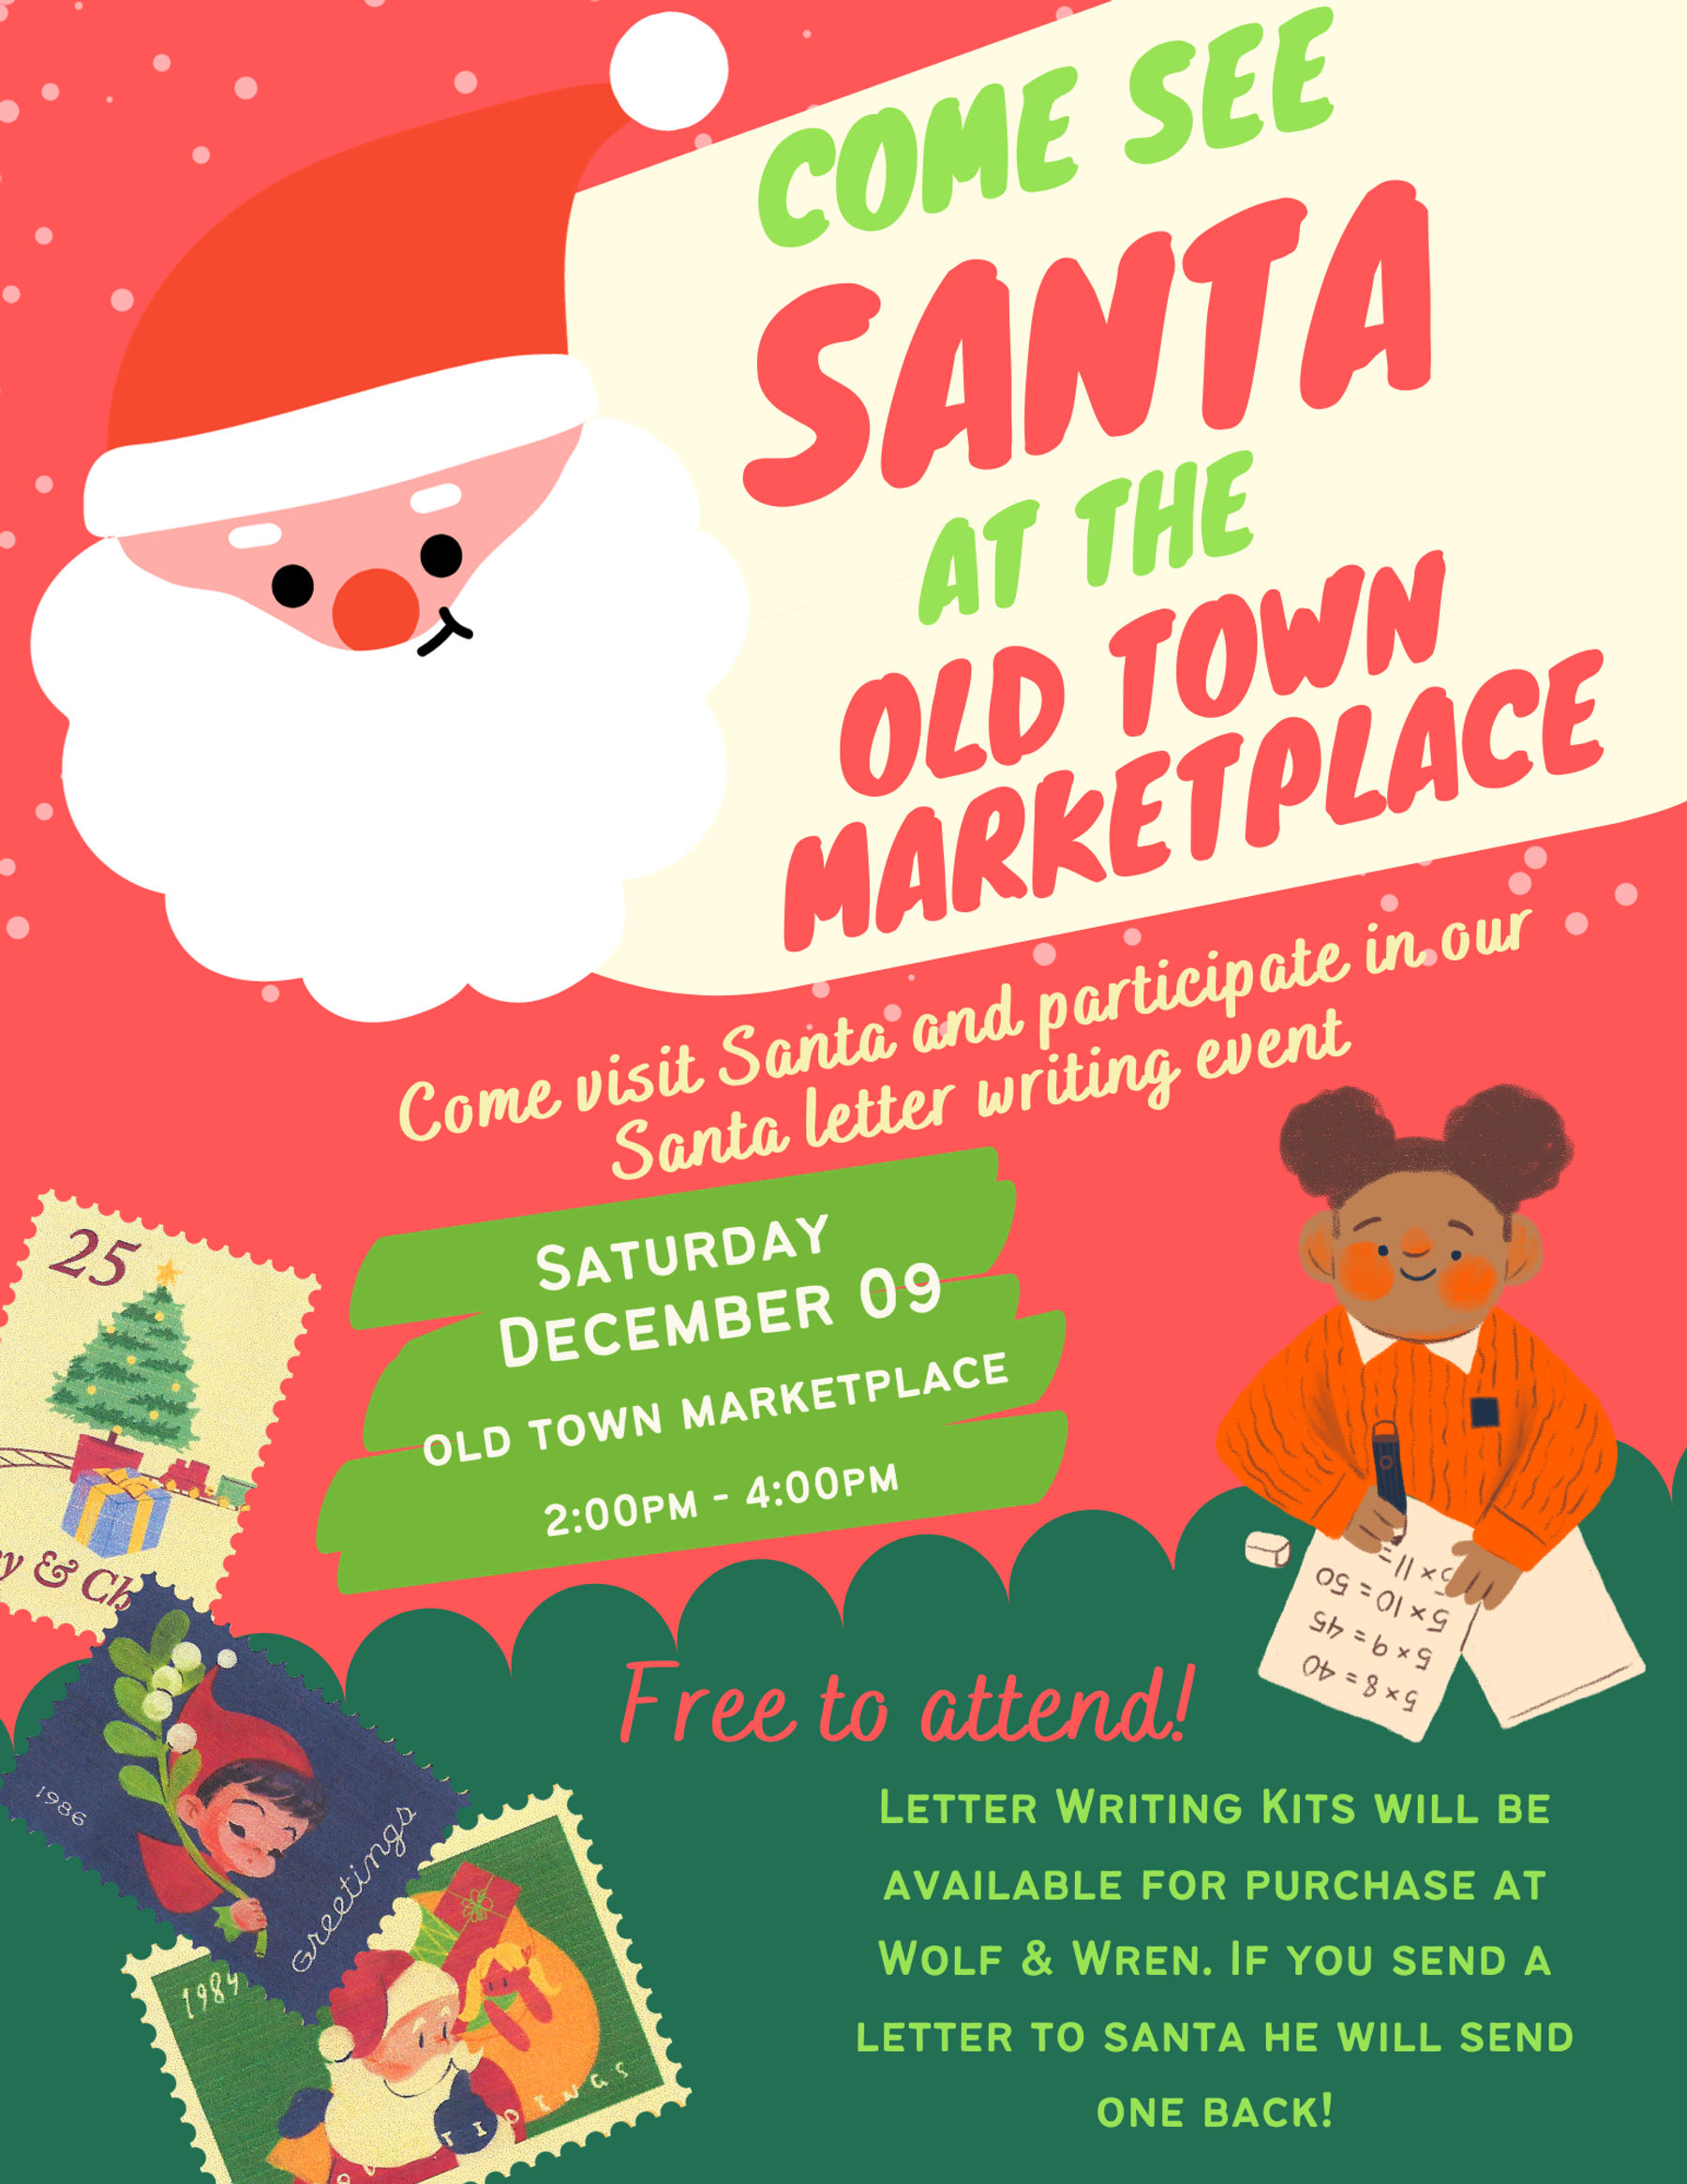 Santa Claus is Coming to Old Town Marketplace